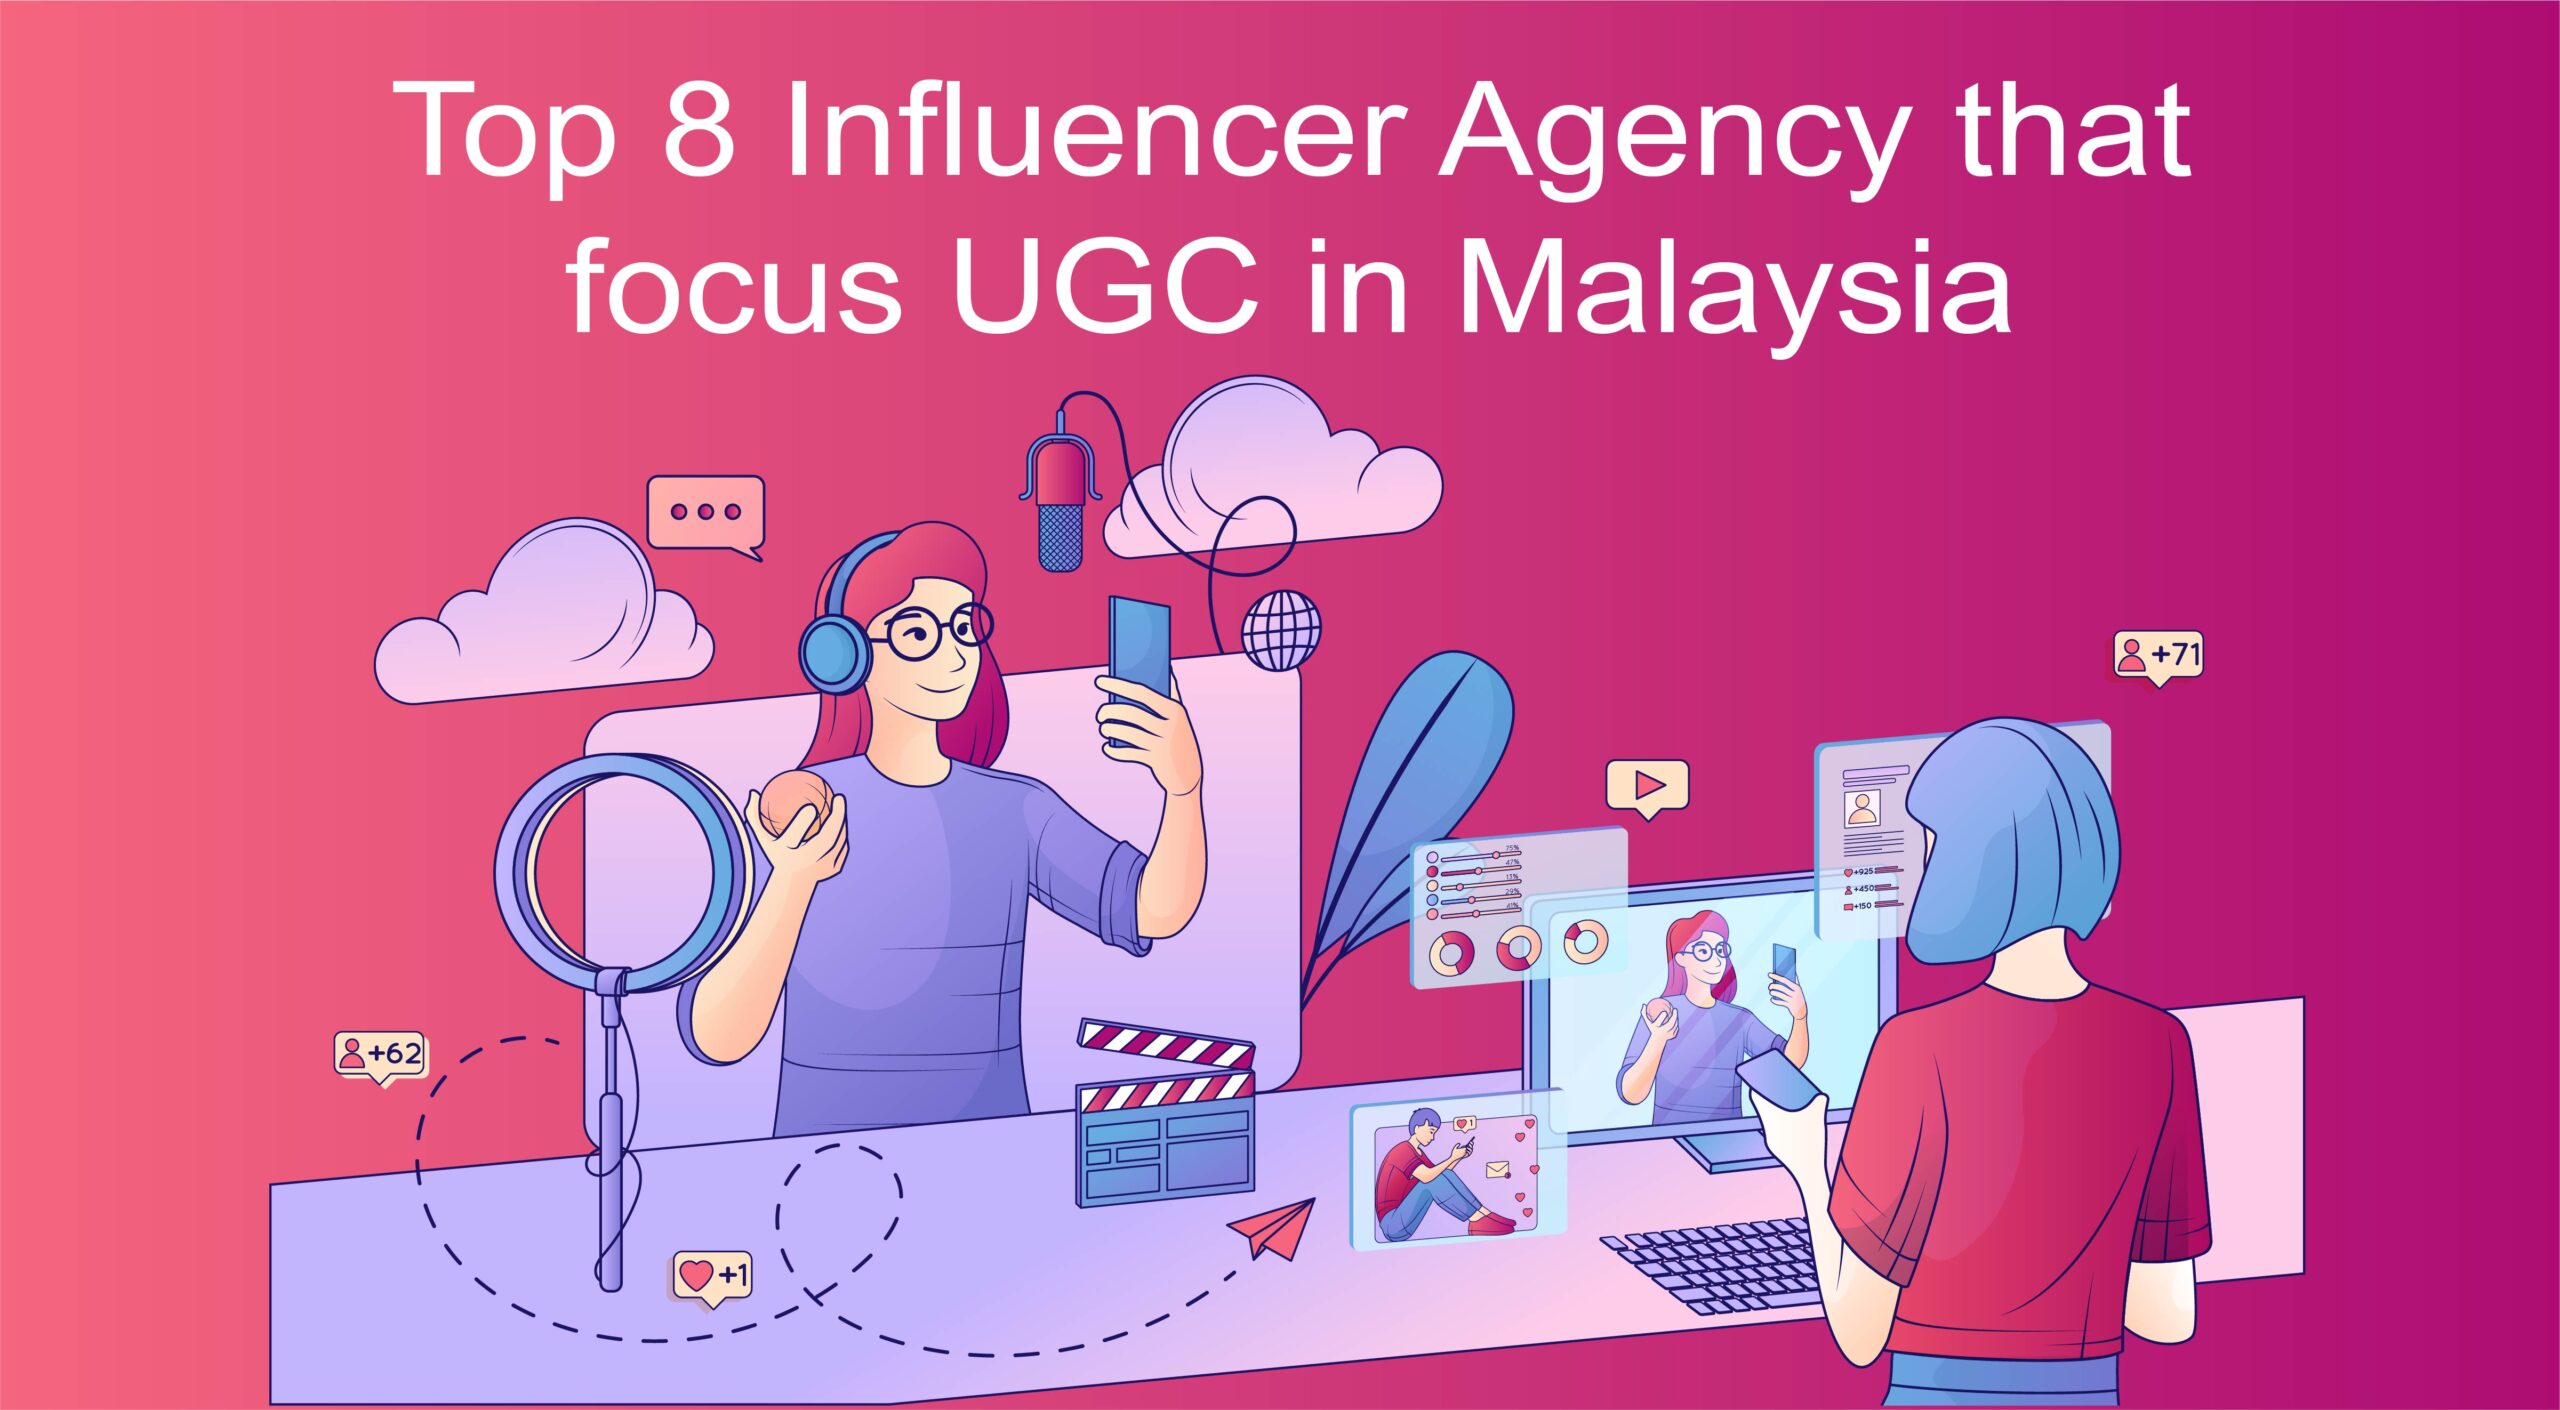 Influencer Agency that focus UGC in Malaysia